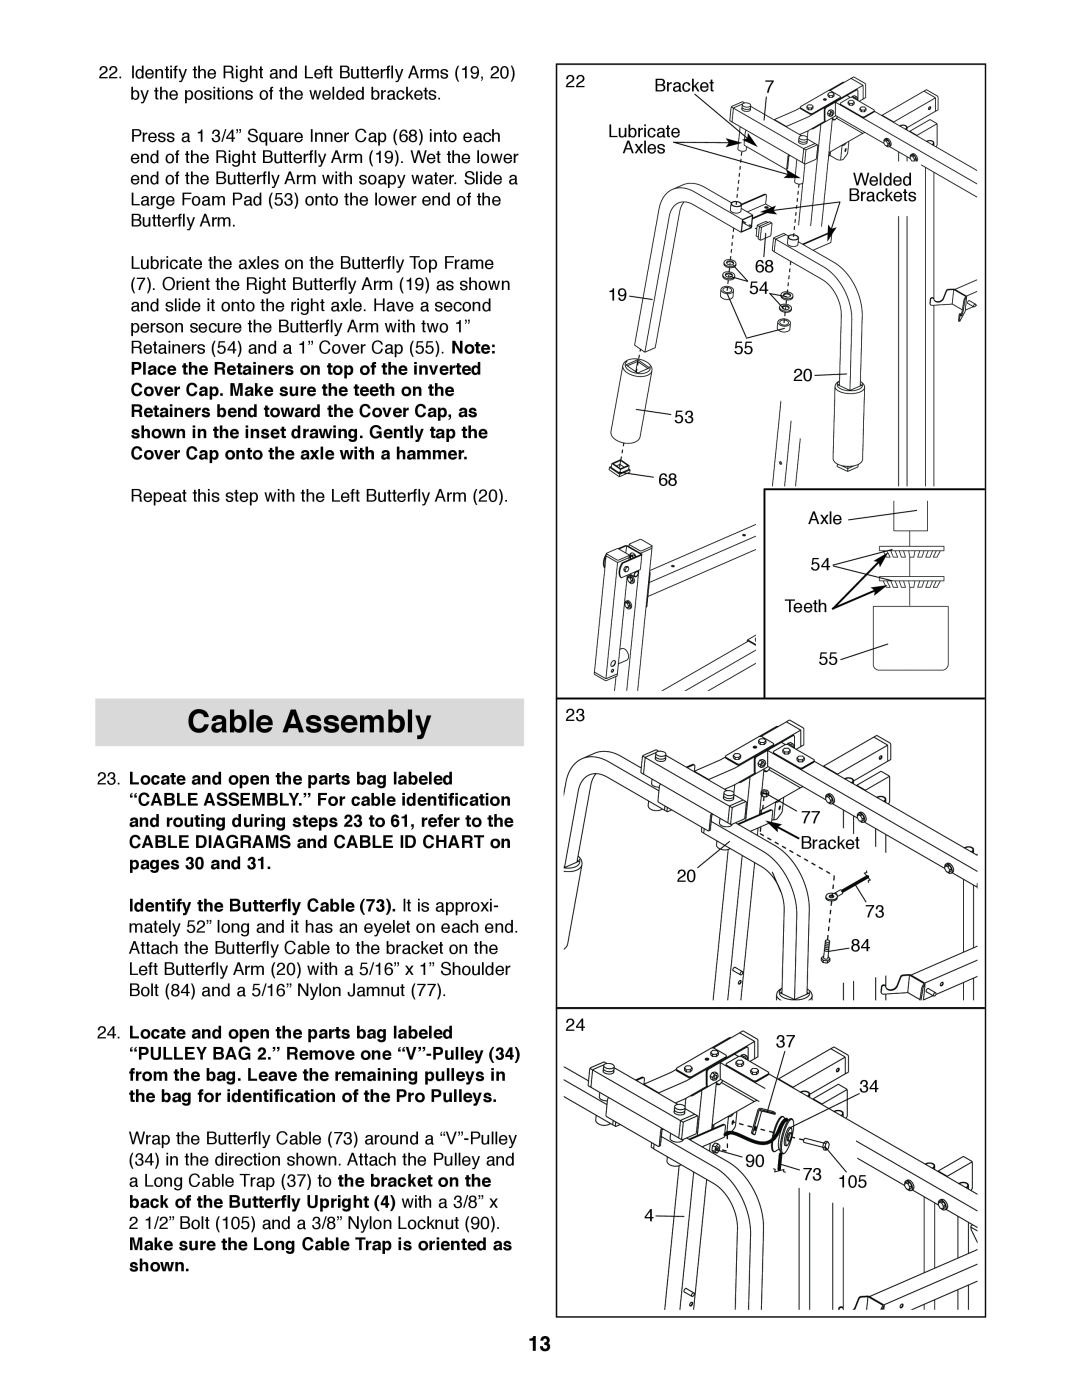 Weider 831.159830 user manual Cable Assembly 